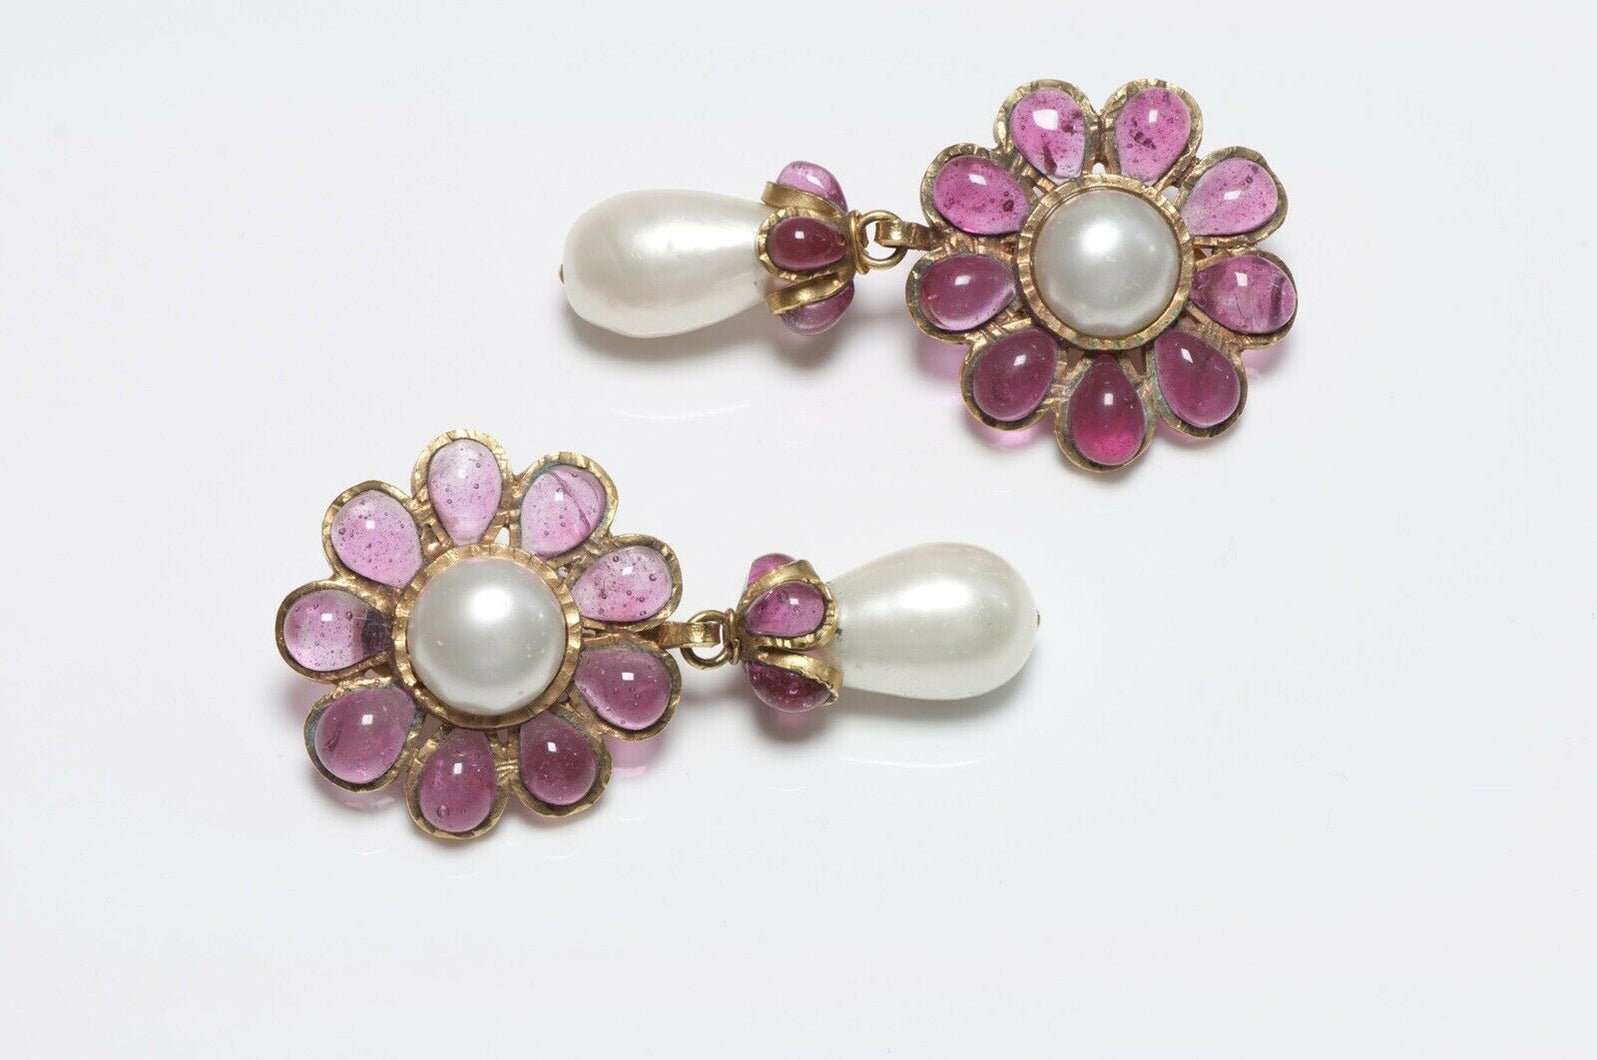 CHANEL 1995 Gripoix Camellia Flower Glass Pearl Earrings - DSF Antique Jewelry